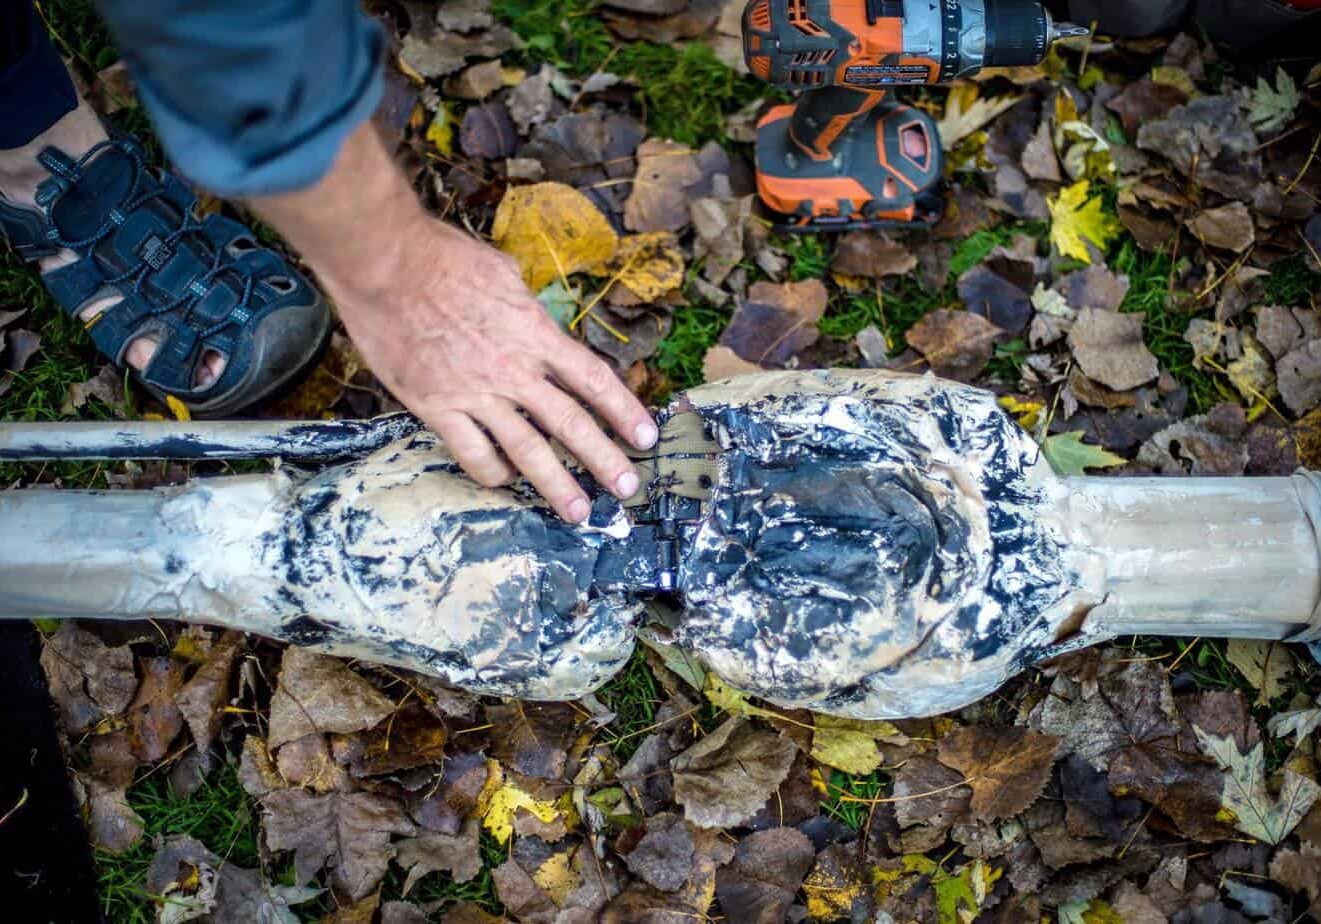 A tight shot of the femur and tibia of a 16 foot tall skeleton puppet laying on the ground of a park covered in autumn foliage. A hand is touching the joint.